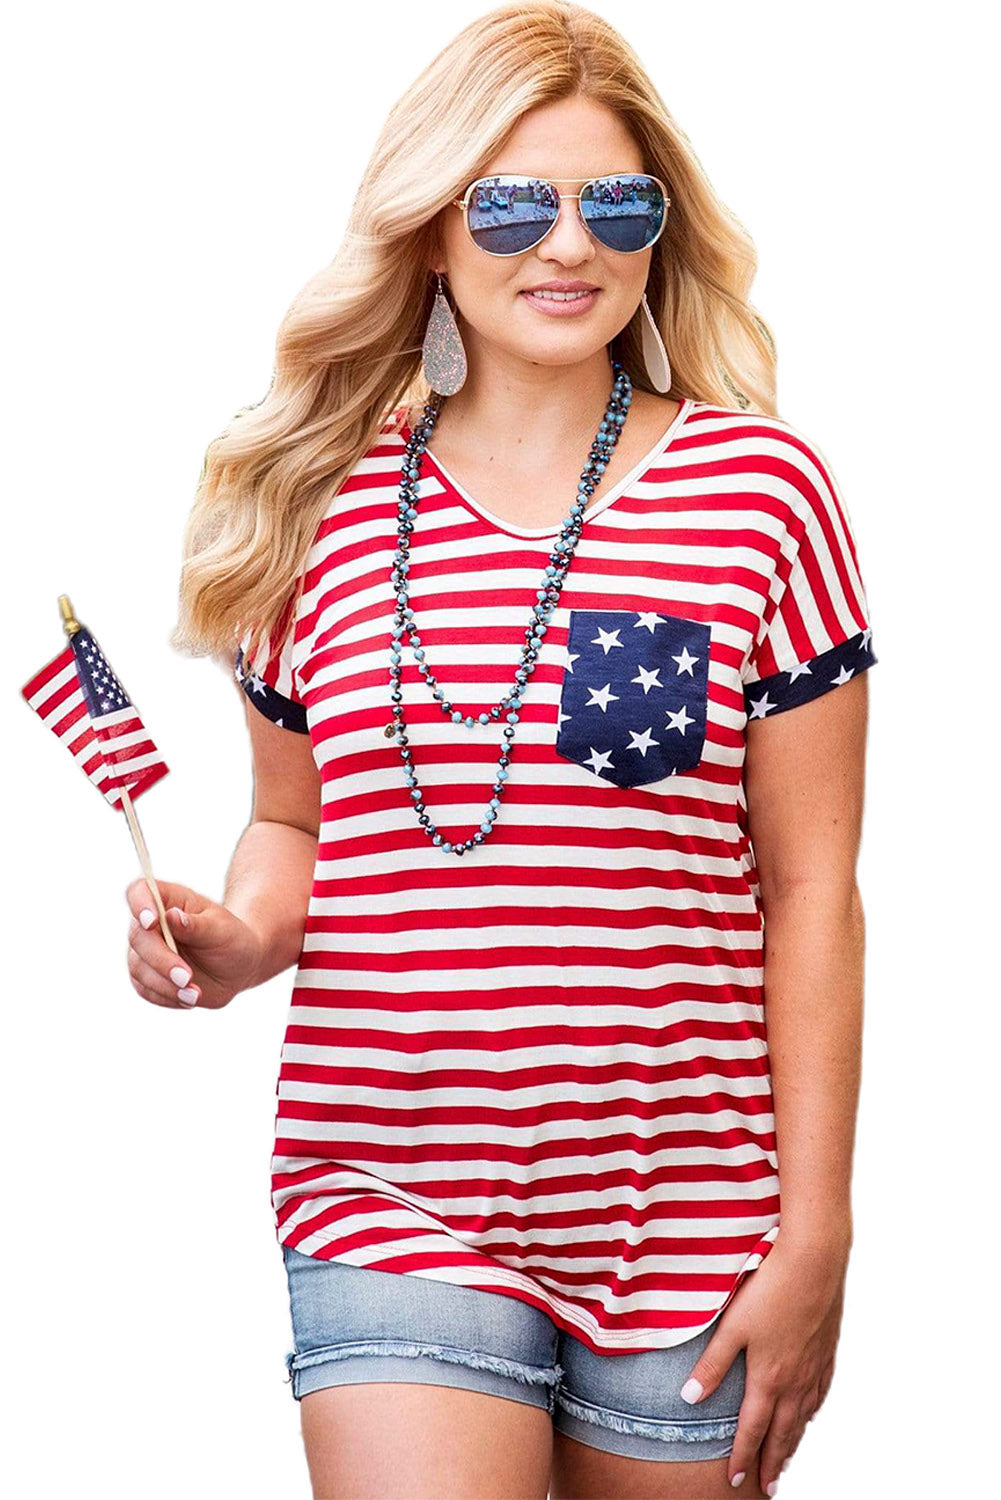 Red National Day Flag Print Tee Shirt for Women American Flag Tee Shirts LC2526077-3